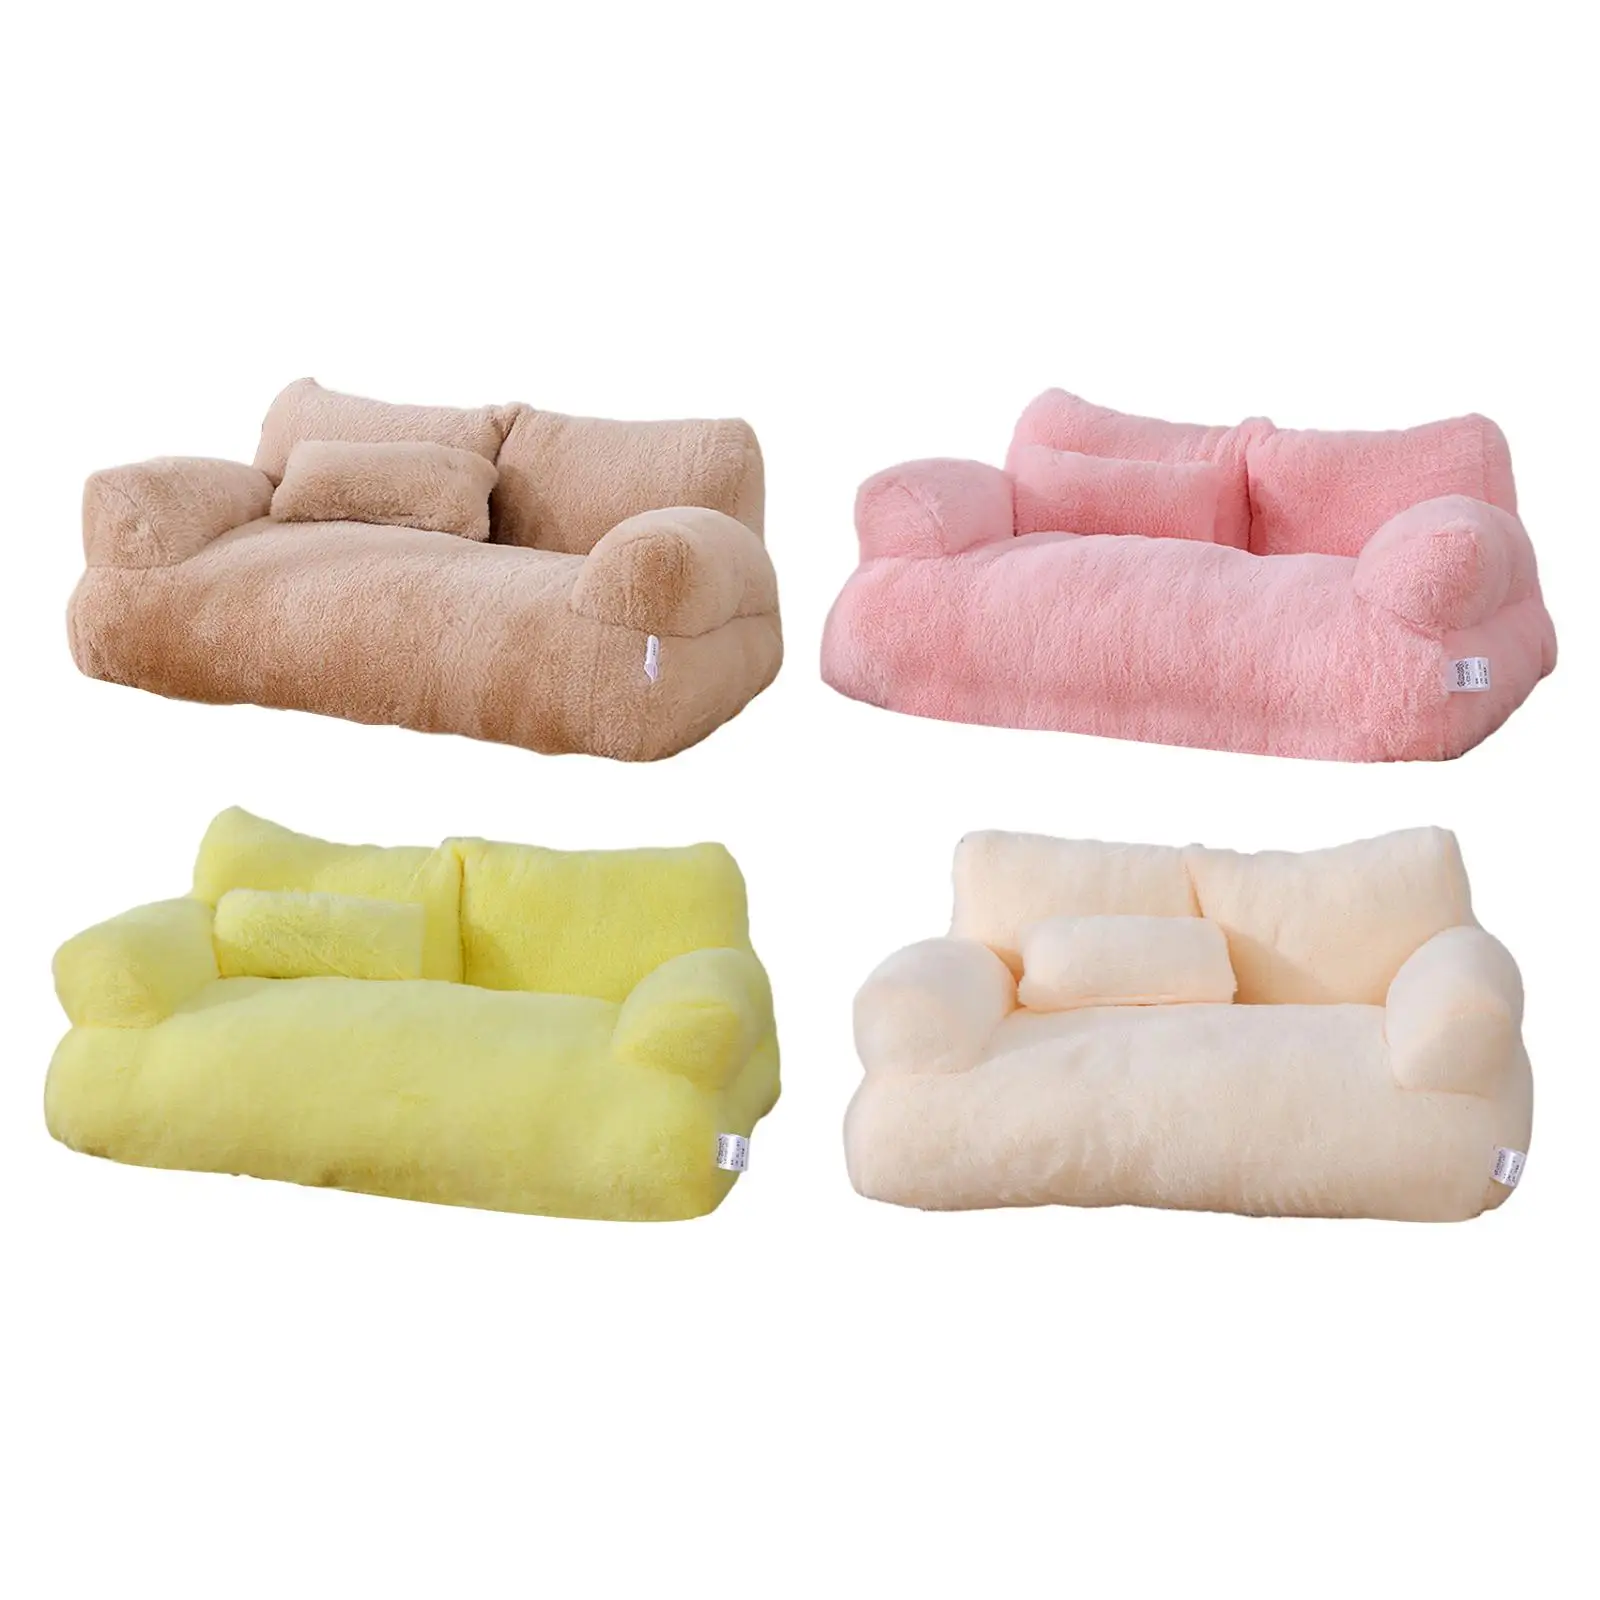 Cat Sofa Couch Pet Bed Nonslip Bottom Puppy Kennel Comfortable Pet Sofa Cat Sleeping Bed Dog Couch for Cats and Small Dogs